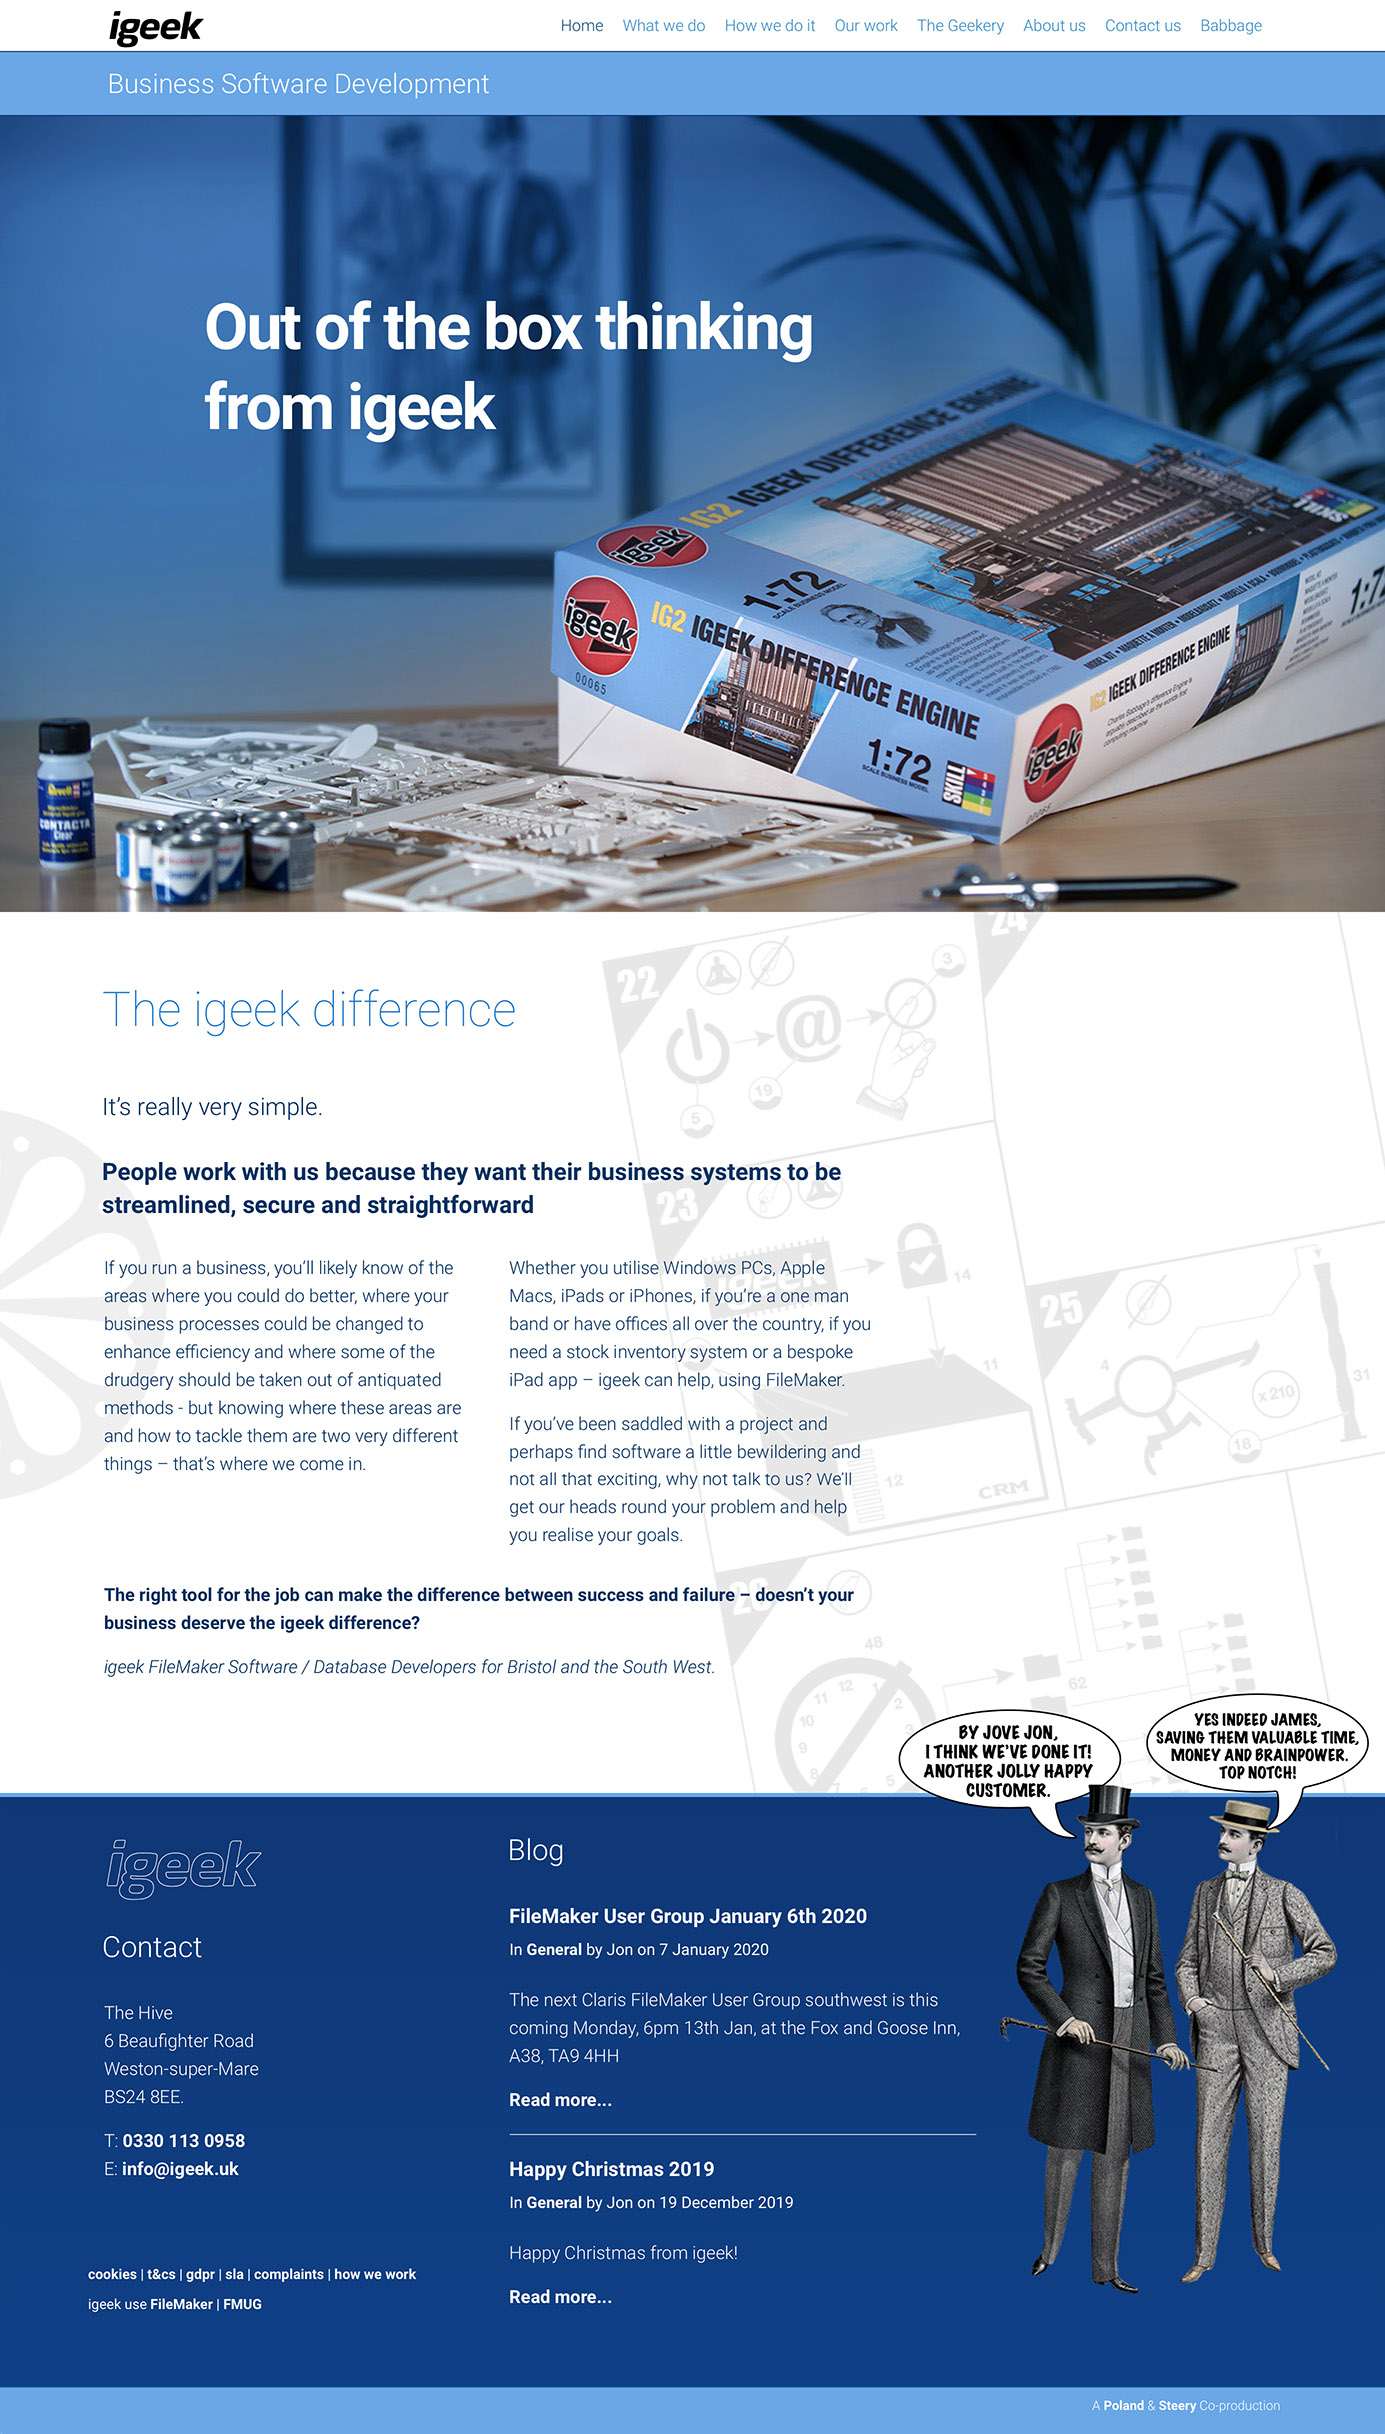 image of the homepage for Igeek Ltd